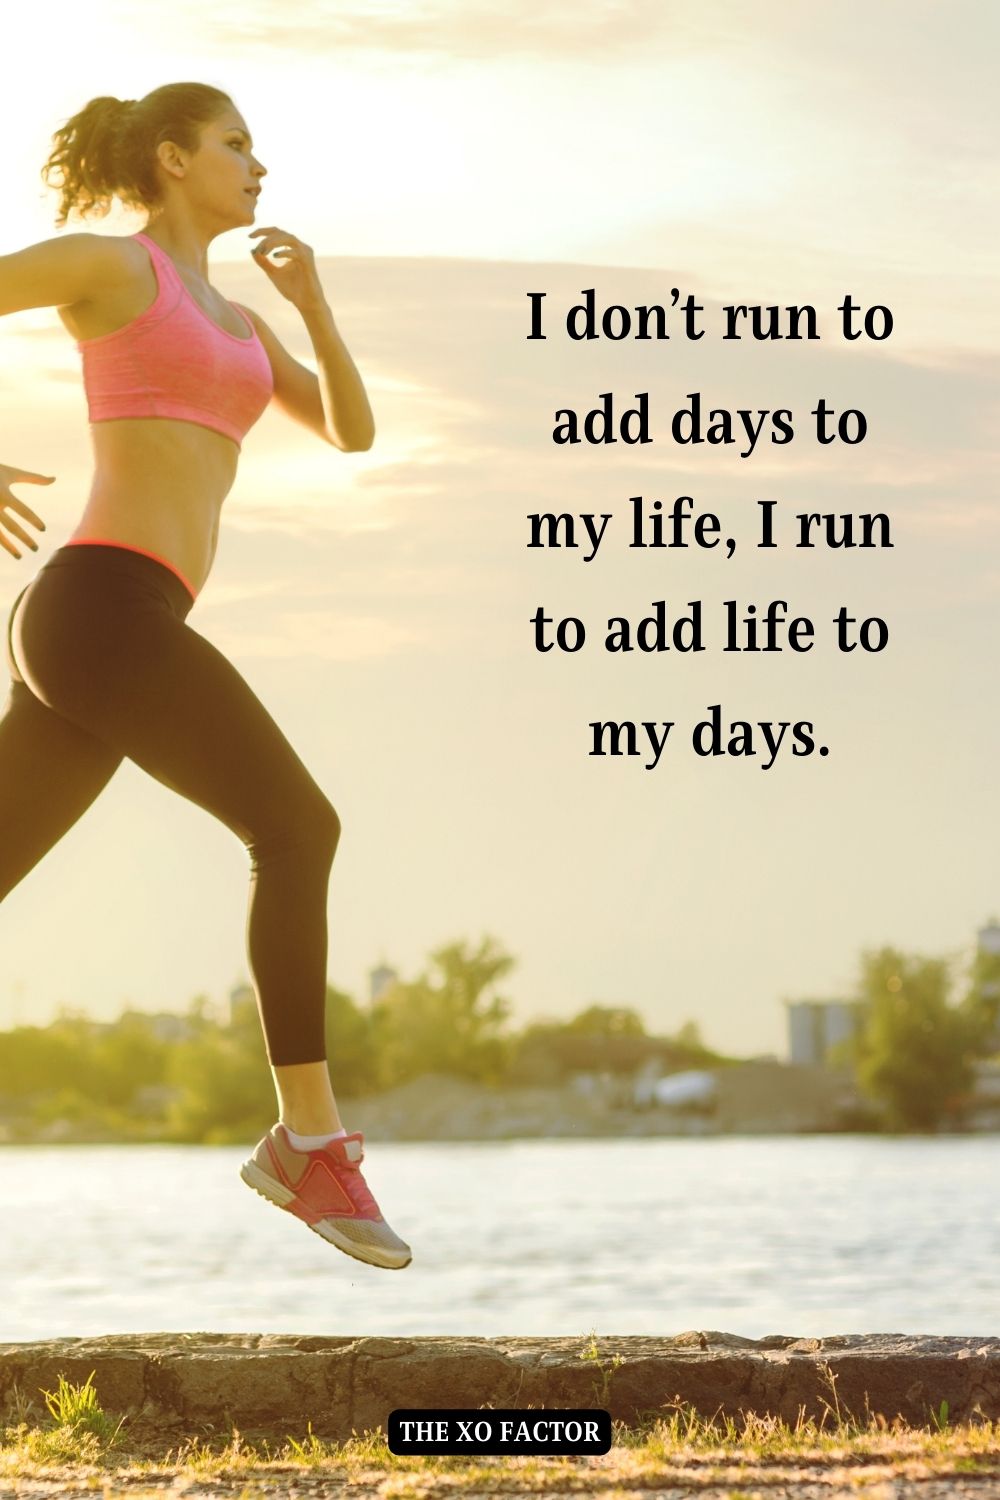 I don’t run to add days to my life, I run to add life to my days.